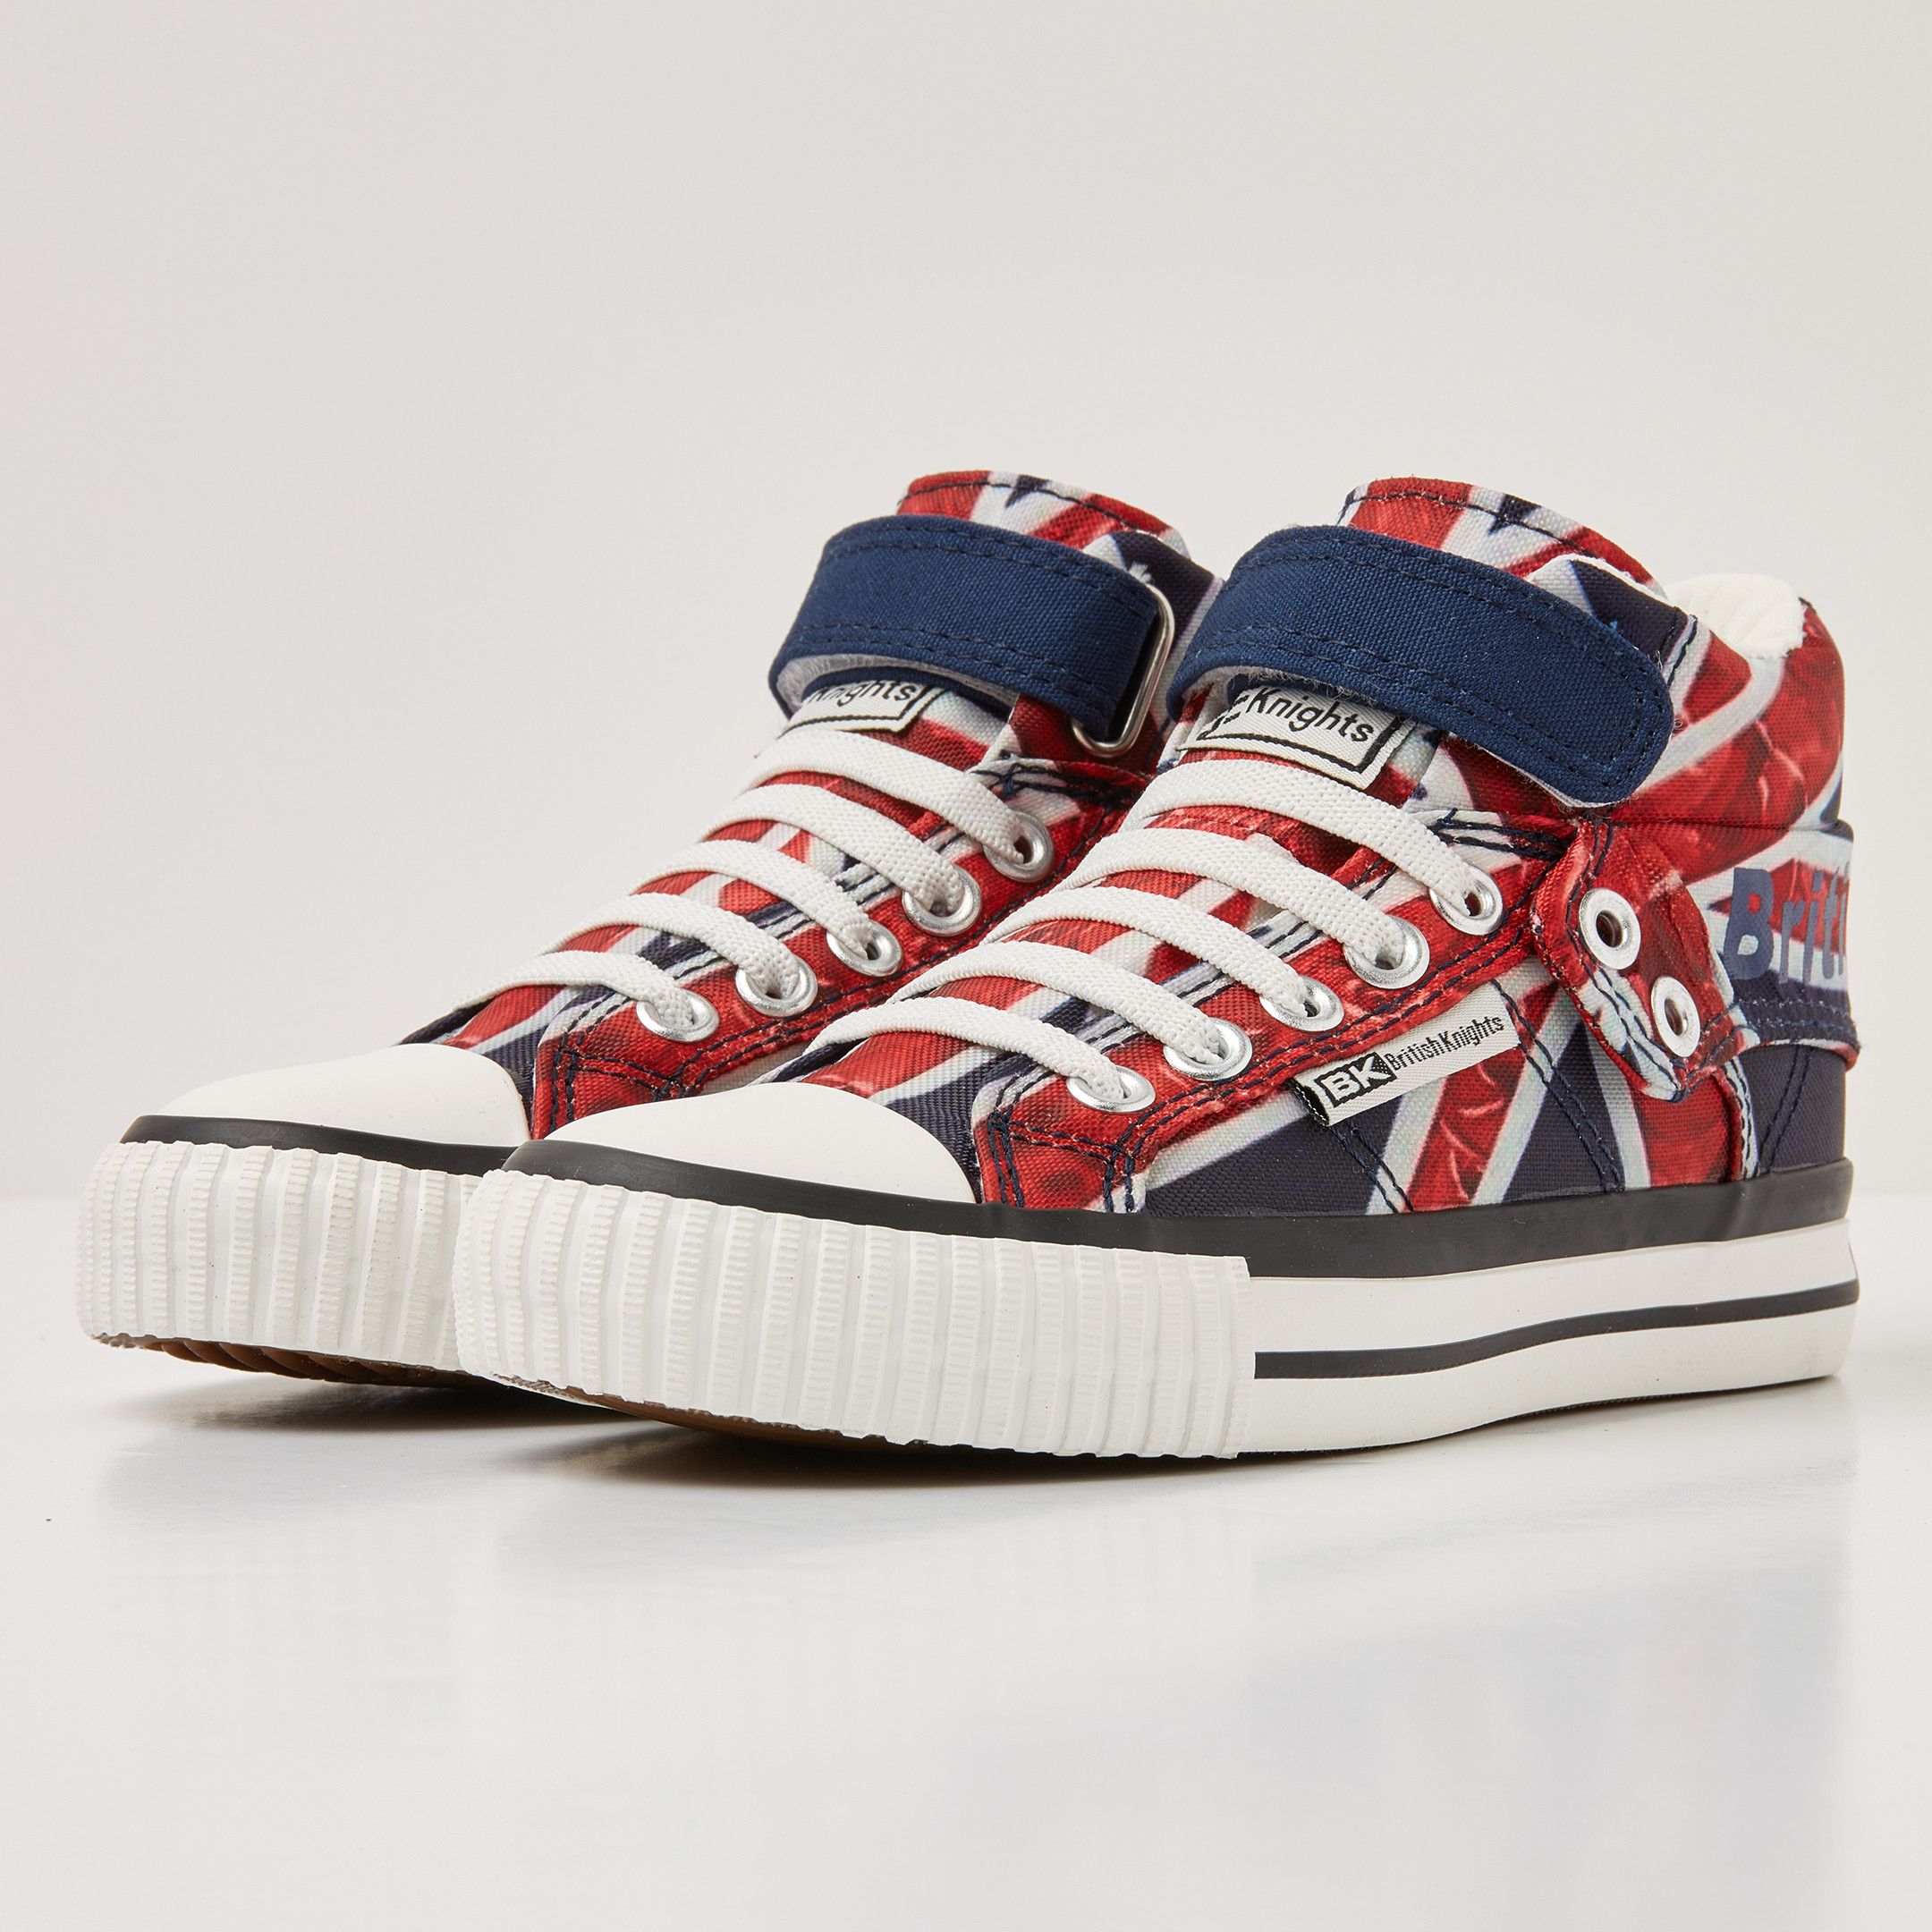 British Knights Sneaker Front view